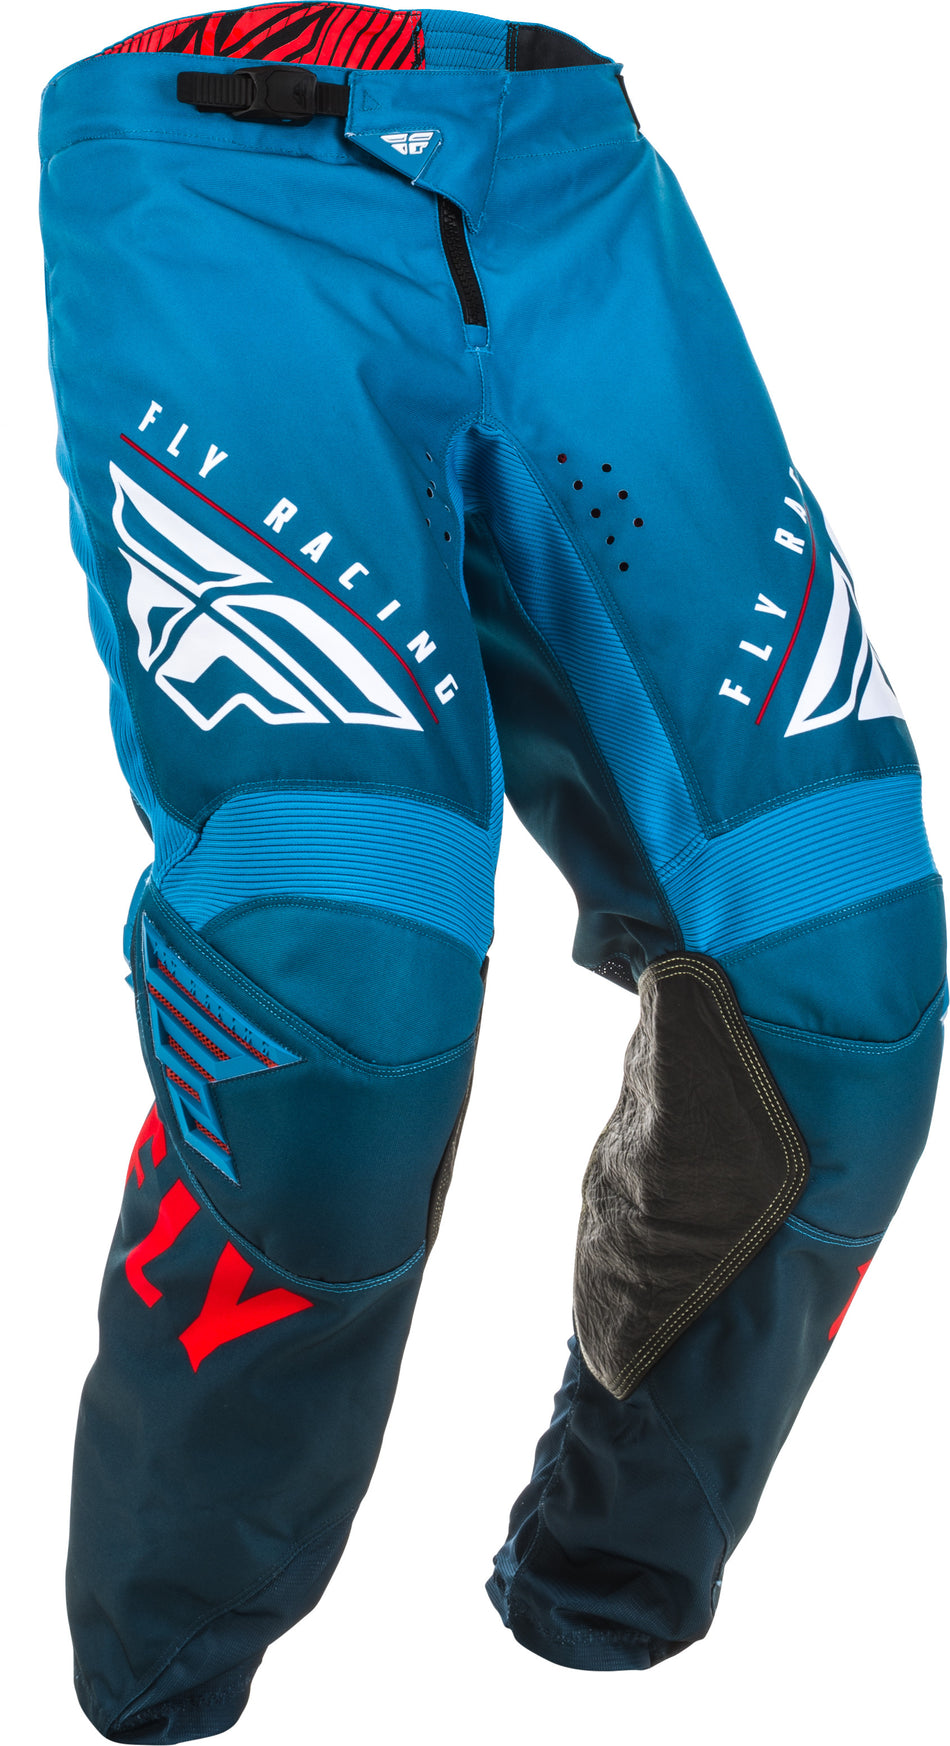 FLY RACING Kinetic K220 Pants Blue/White/Red Sz 22 373-53122